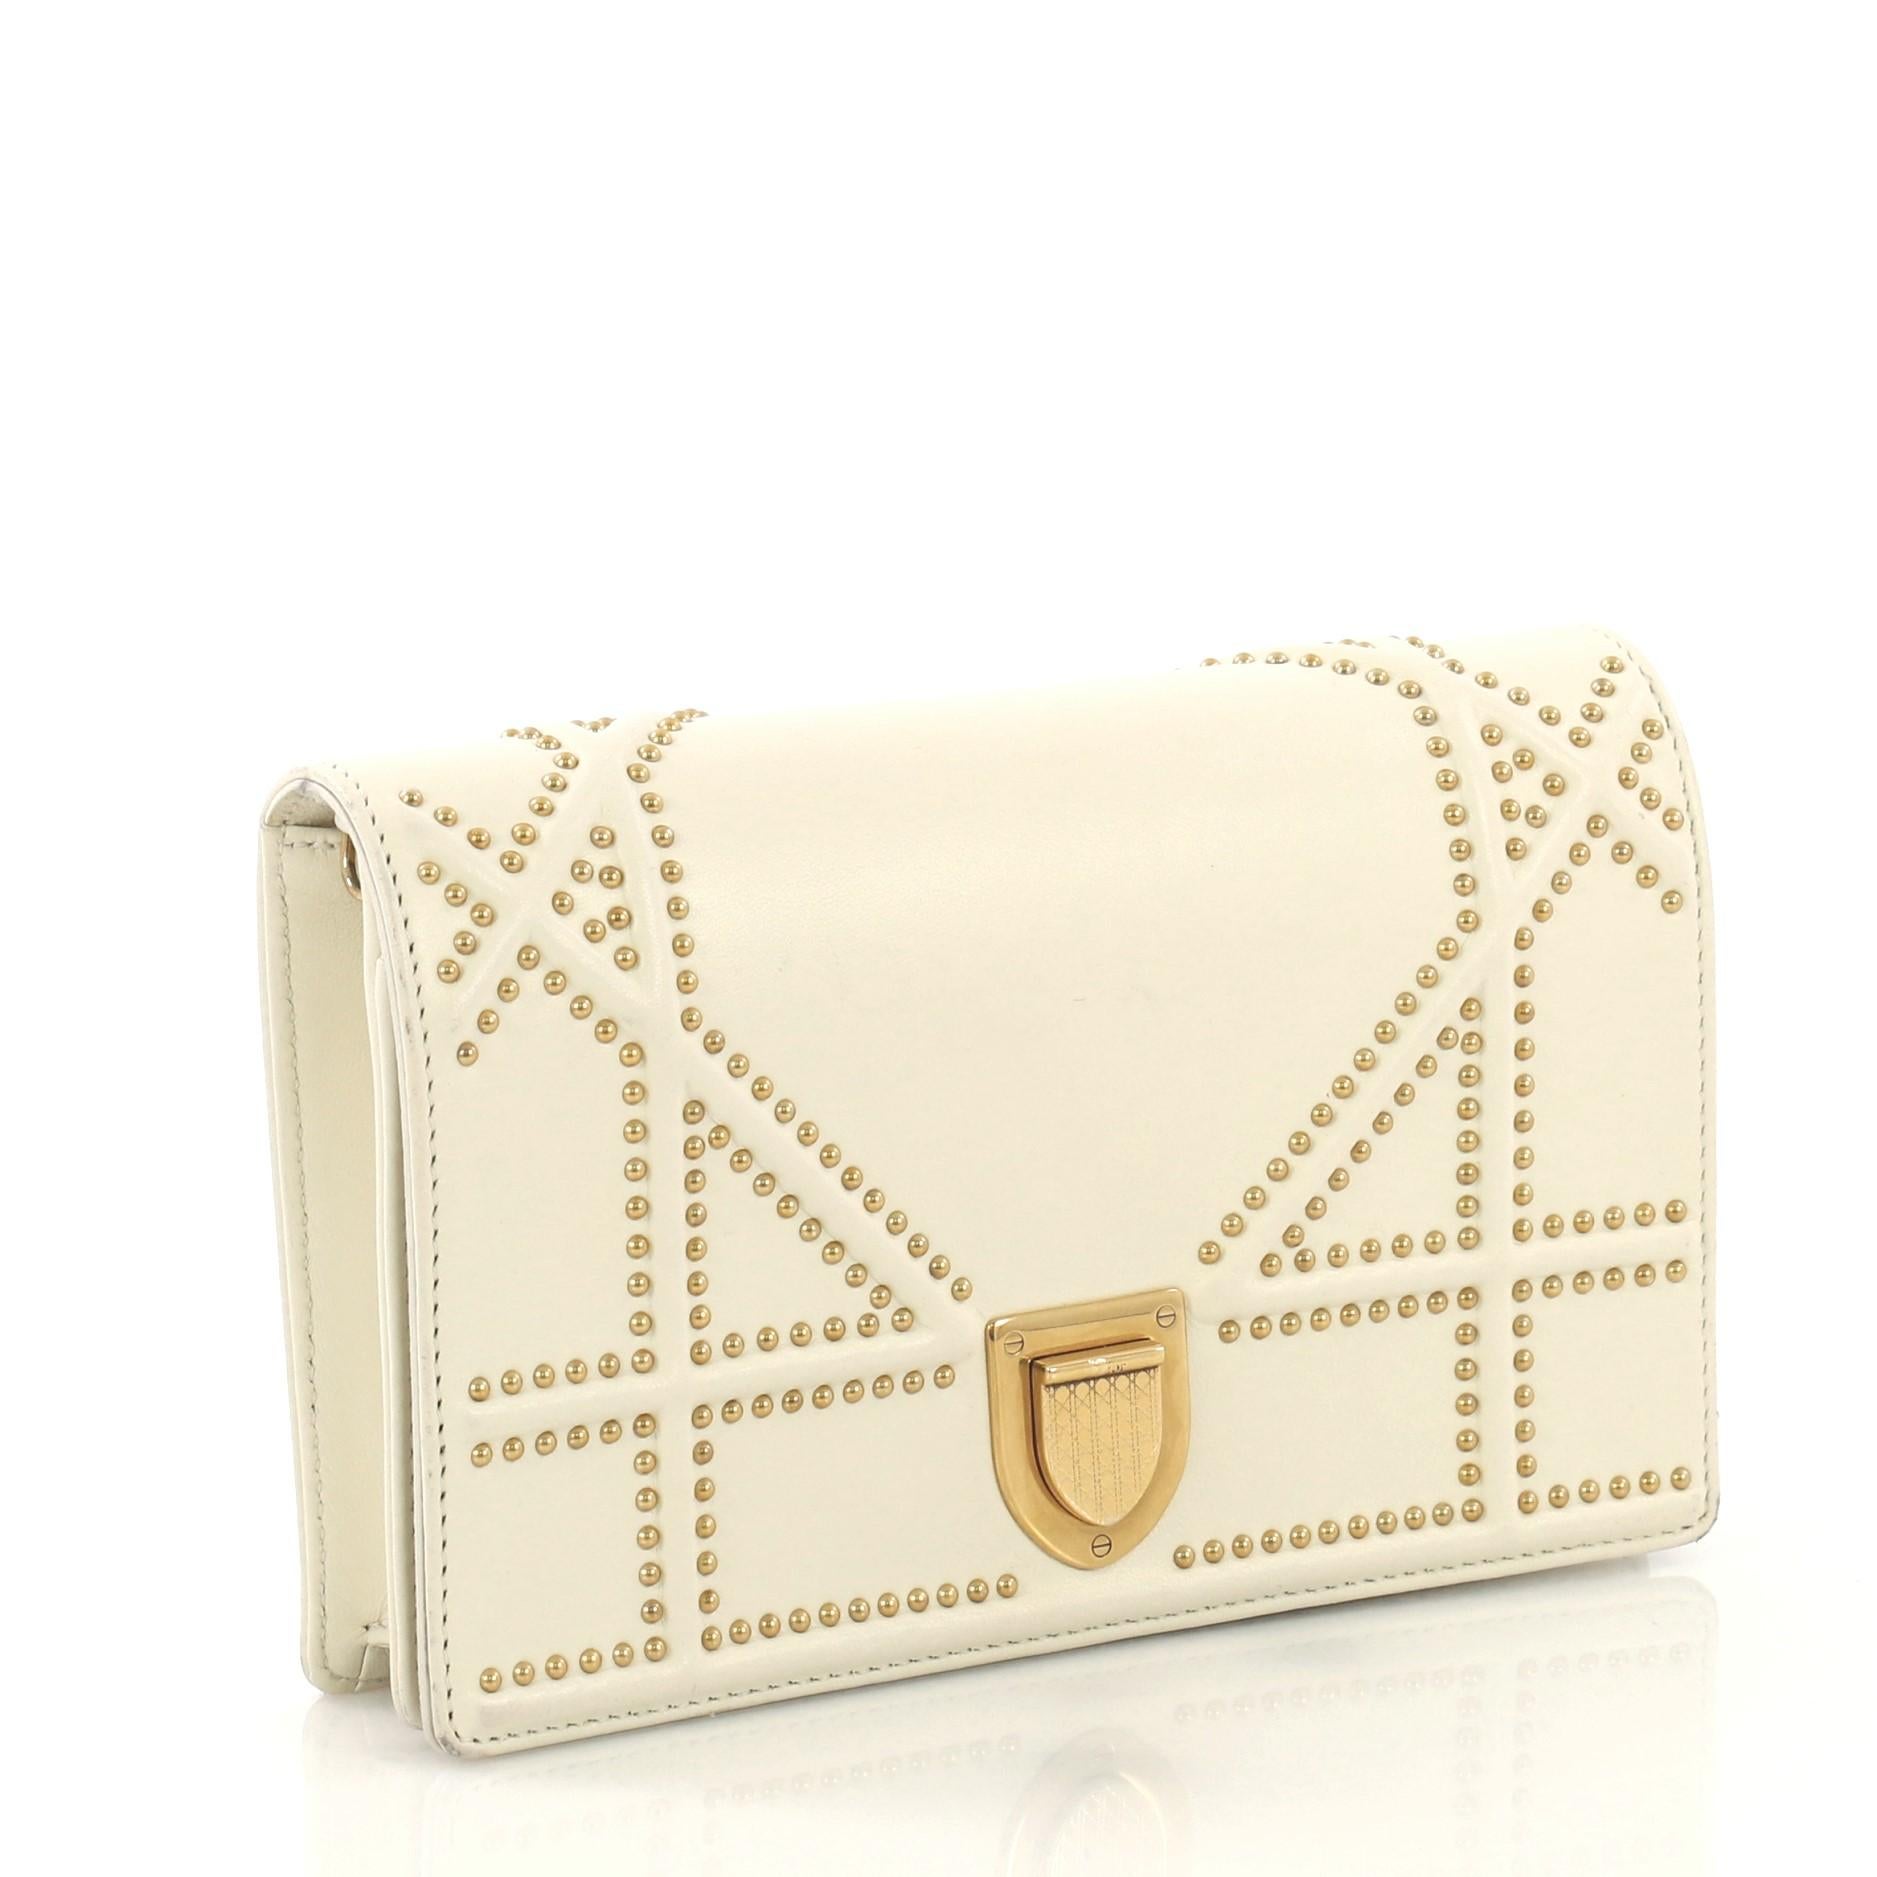 This Christian Dior Diorama Wallet on Chain Studded Leather, crafted from white cannage embossed leather with stud detailing, features chain link shoulder strap and gold-tone hardware. Its crest-shaped press closure opens to an off white suede and